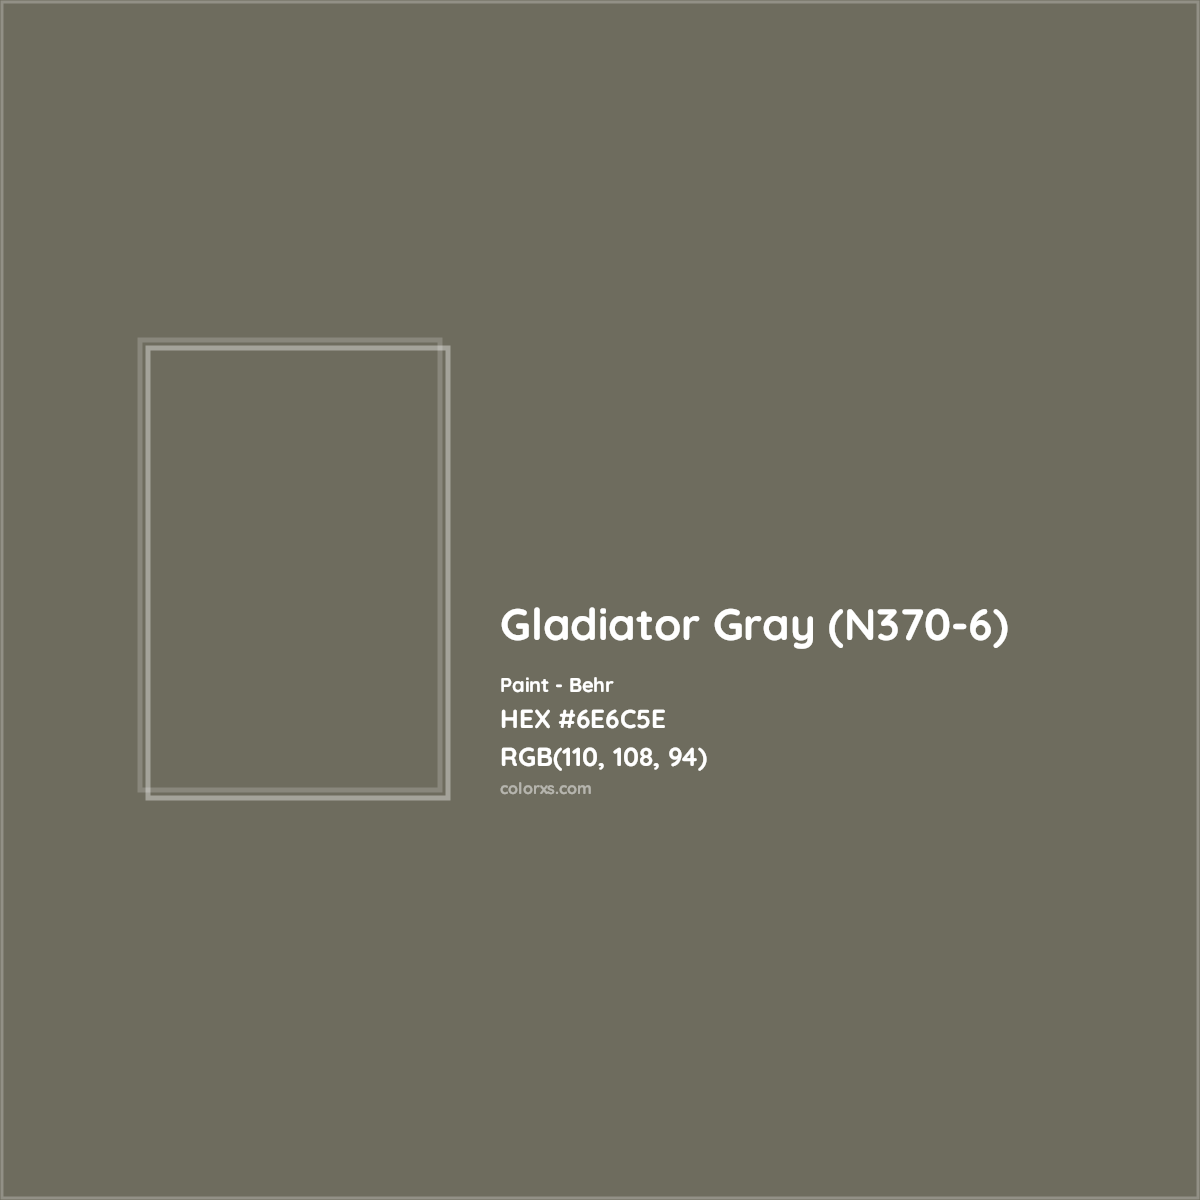 HEX #6E6C5E Gladiator Gray (N370-6) Paint Behr - Color Code